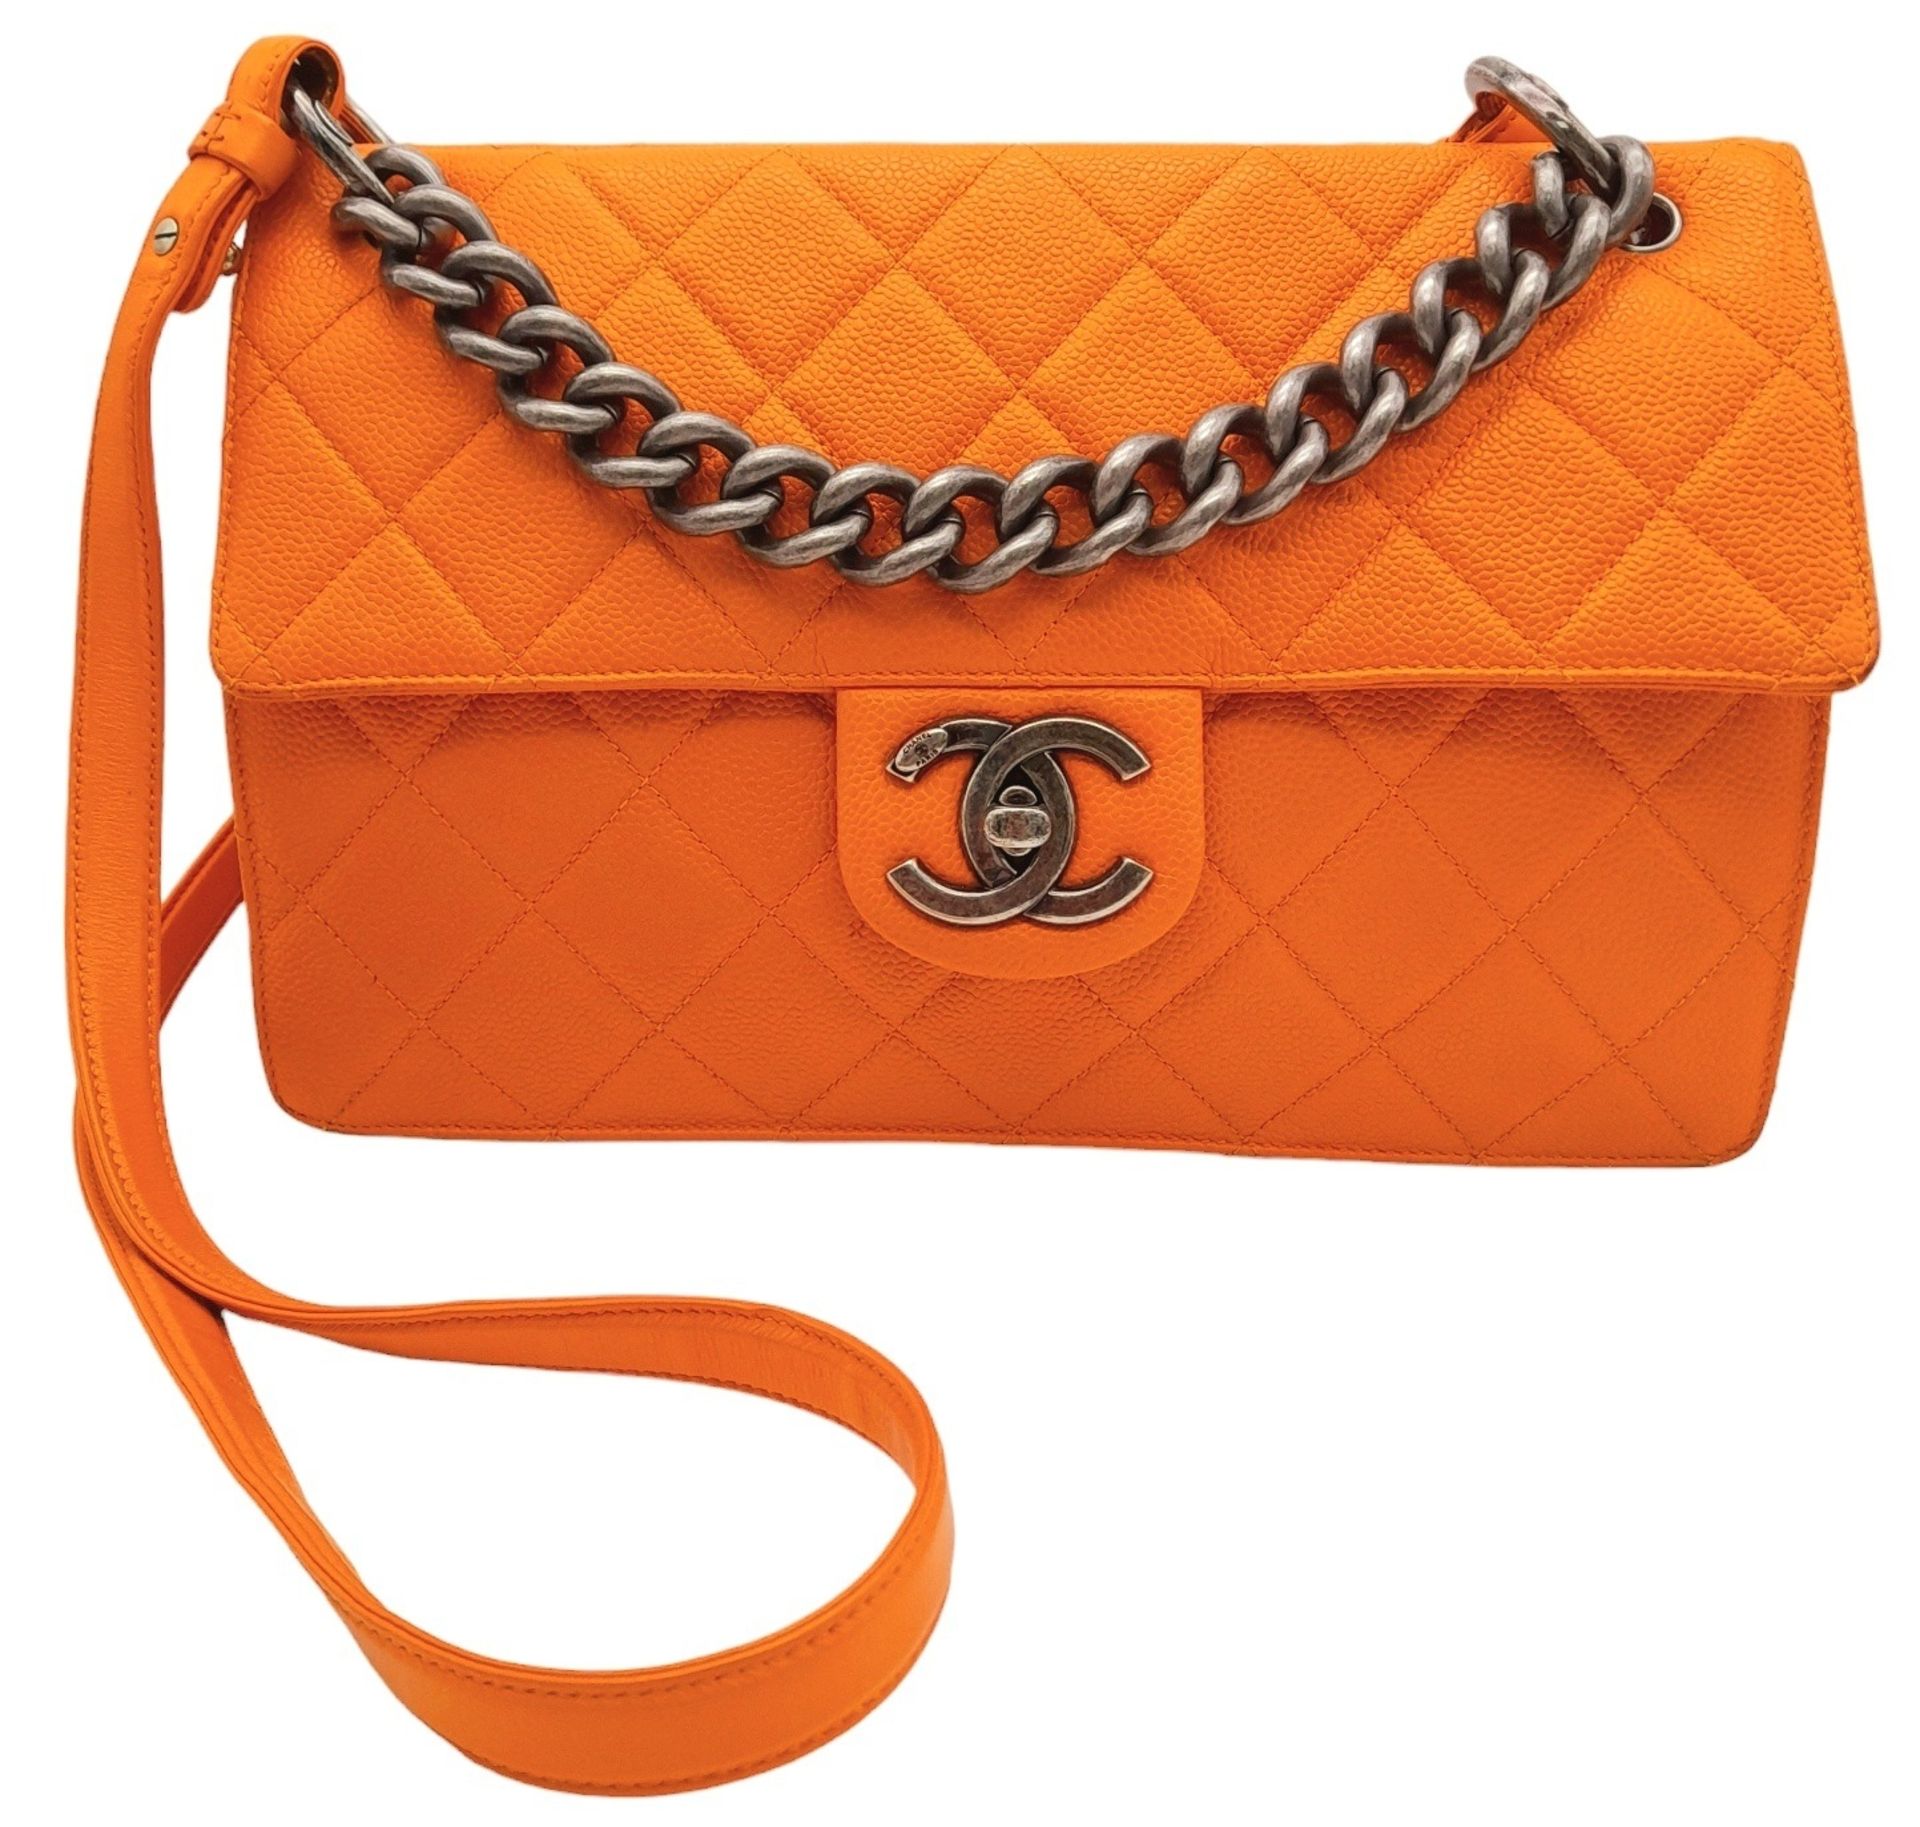 A Chanel Orange Quilted Caviar Leather Retro Shoulder Bag. Front flap with CC turn-lock and